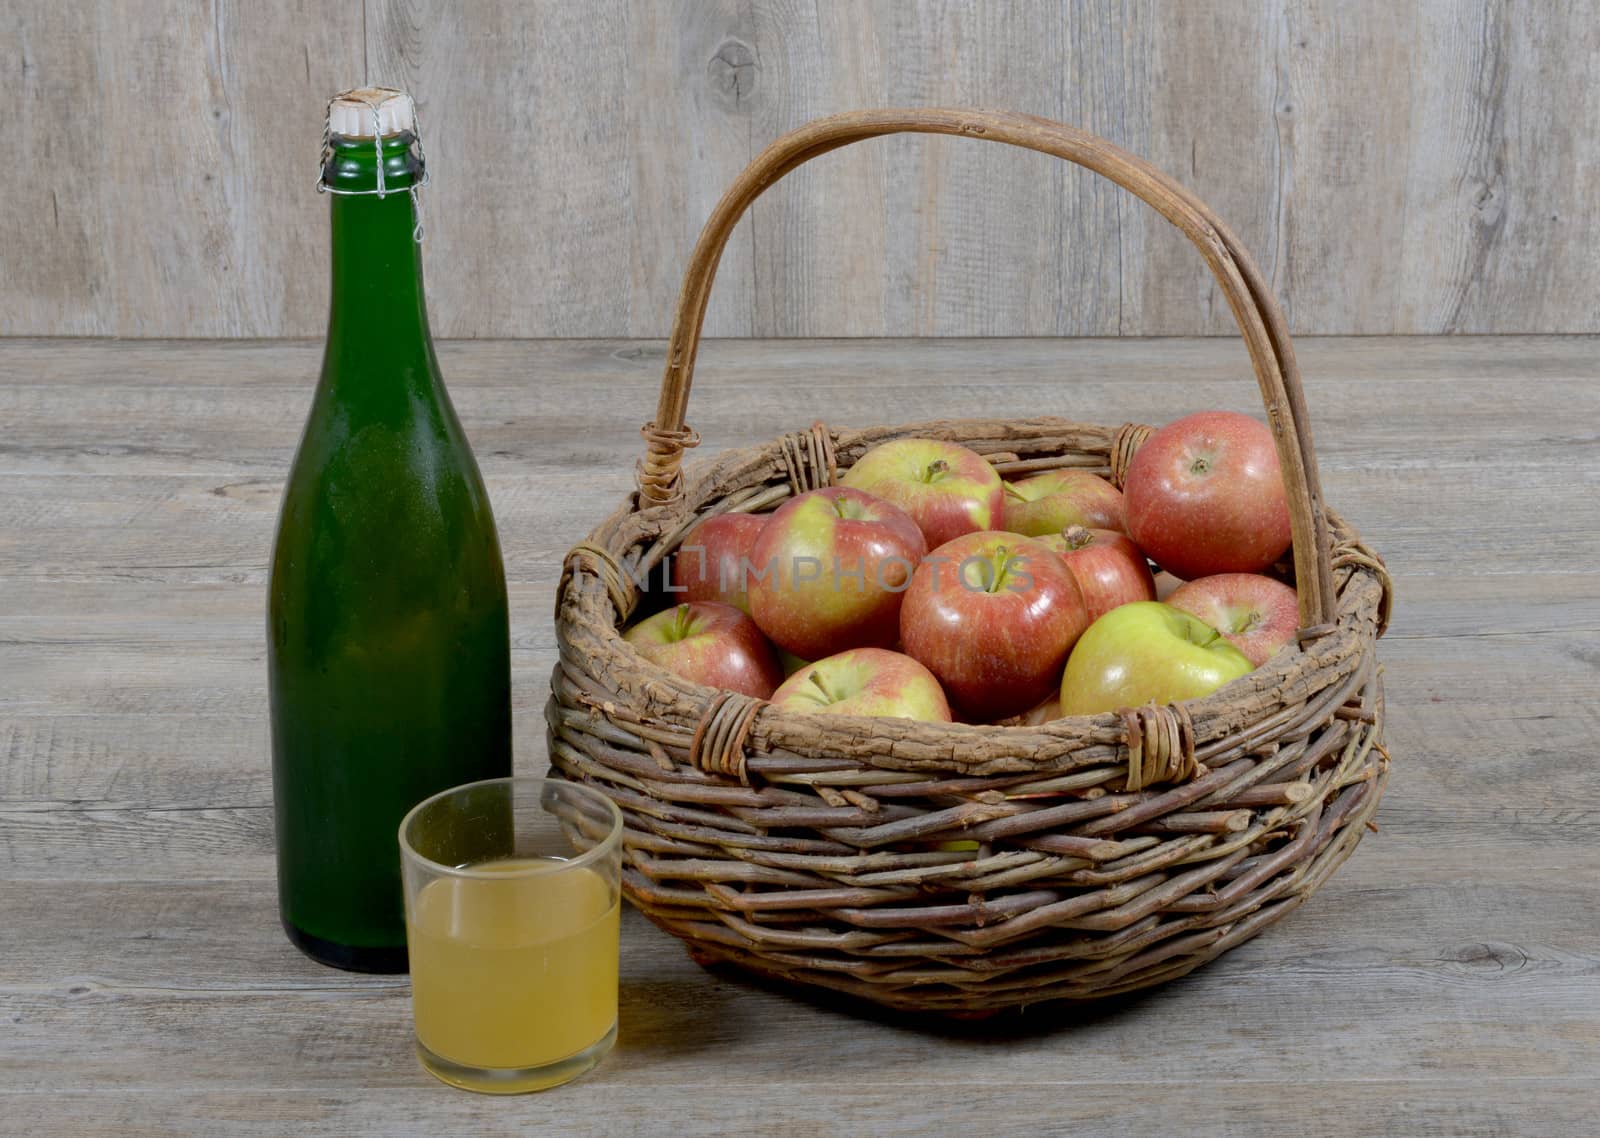 Apple basket and bottle with a glass of Norman cider